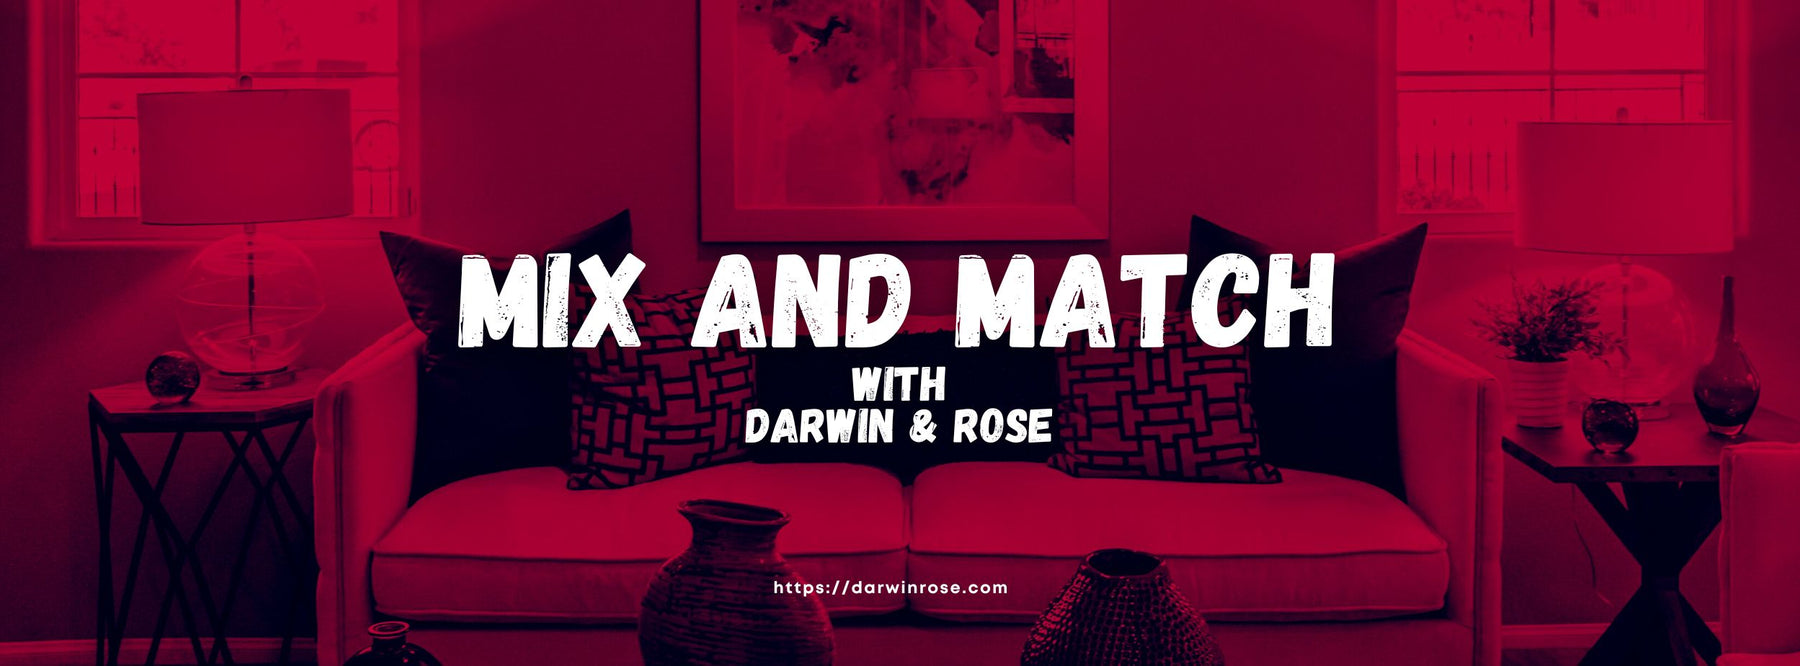 Mix and Match with Darwin & Rose Home Decor!